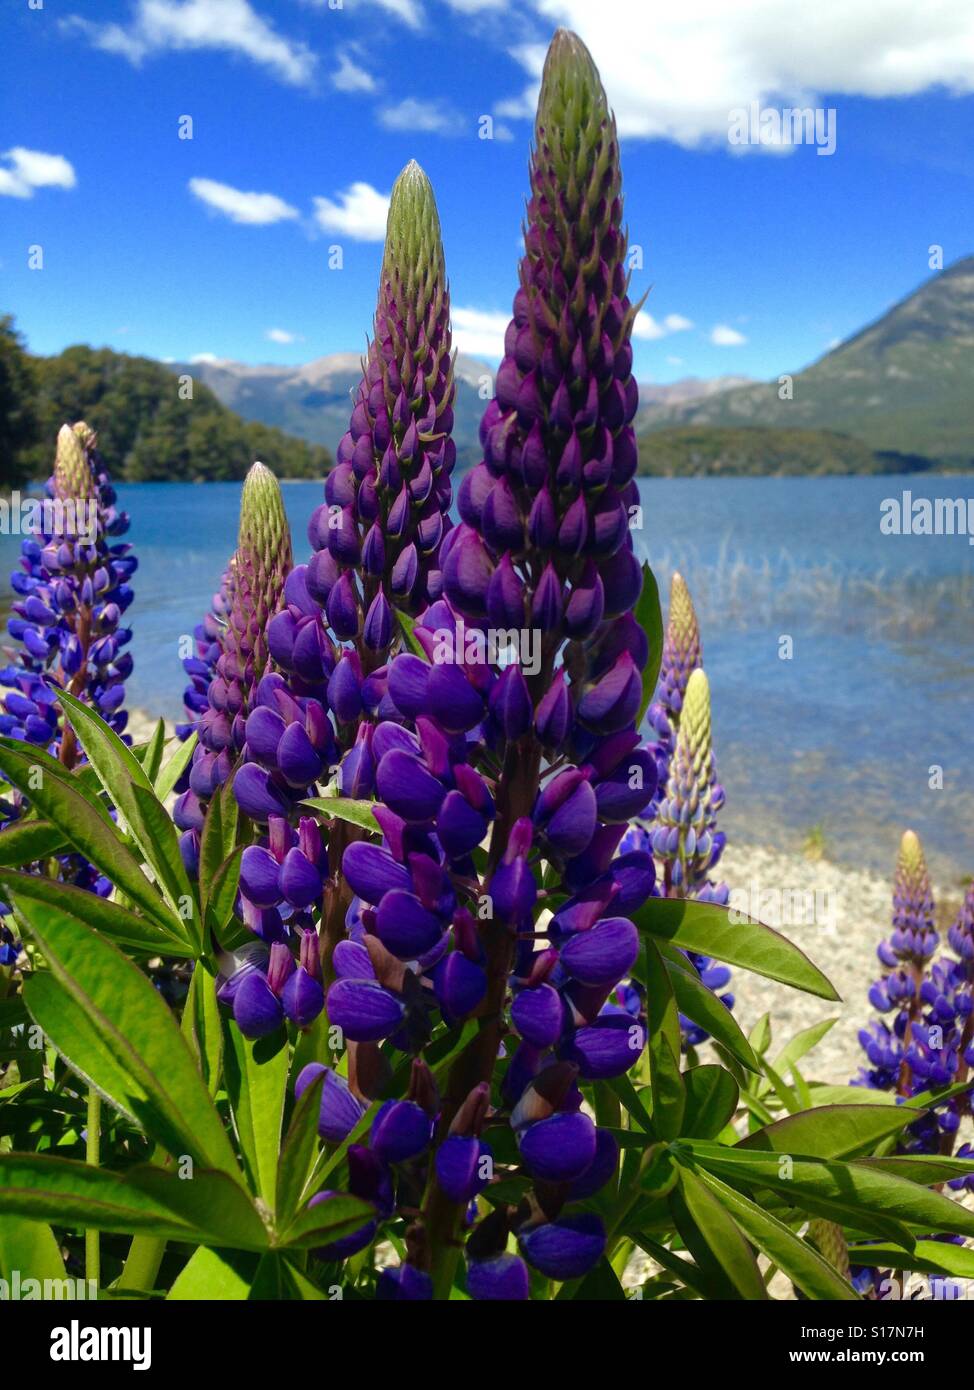 Beautiful purple lupin flowers by the lake in Bariloche, Patagonia, Argentina. Stock Photo